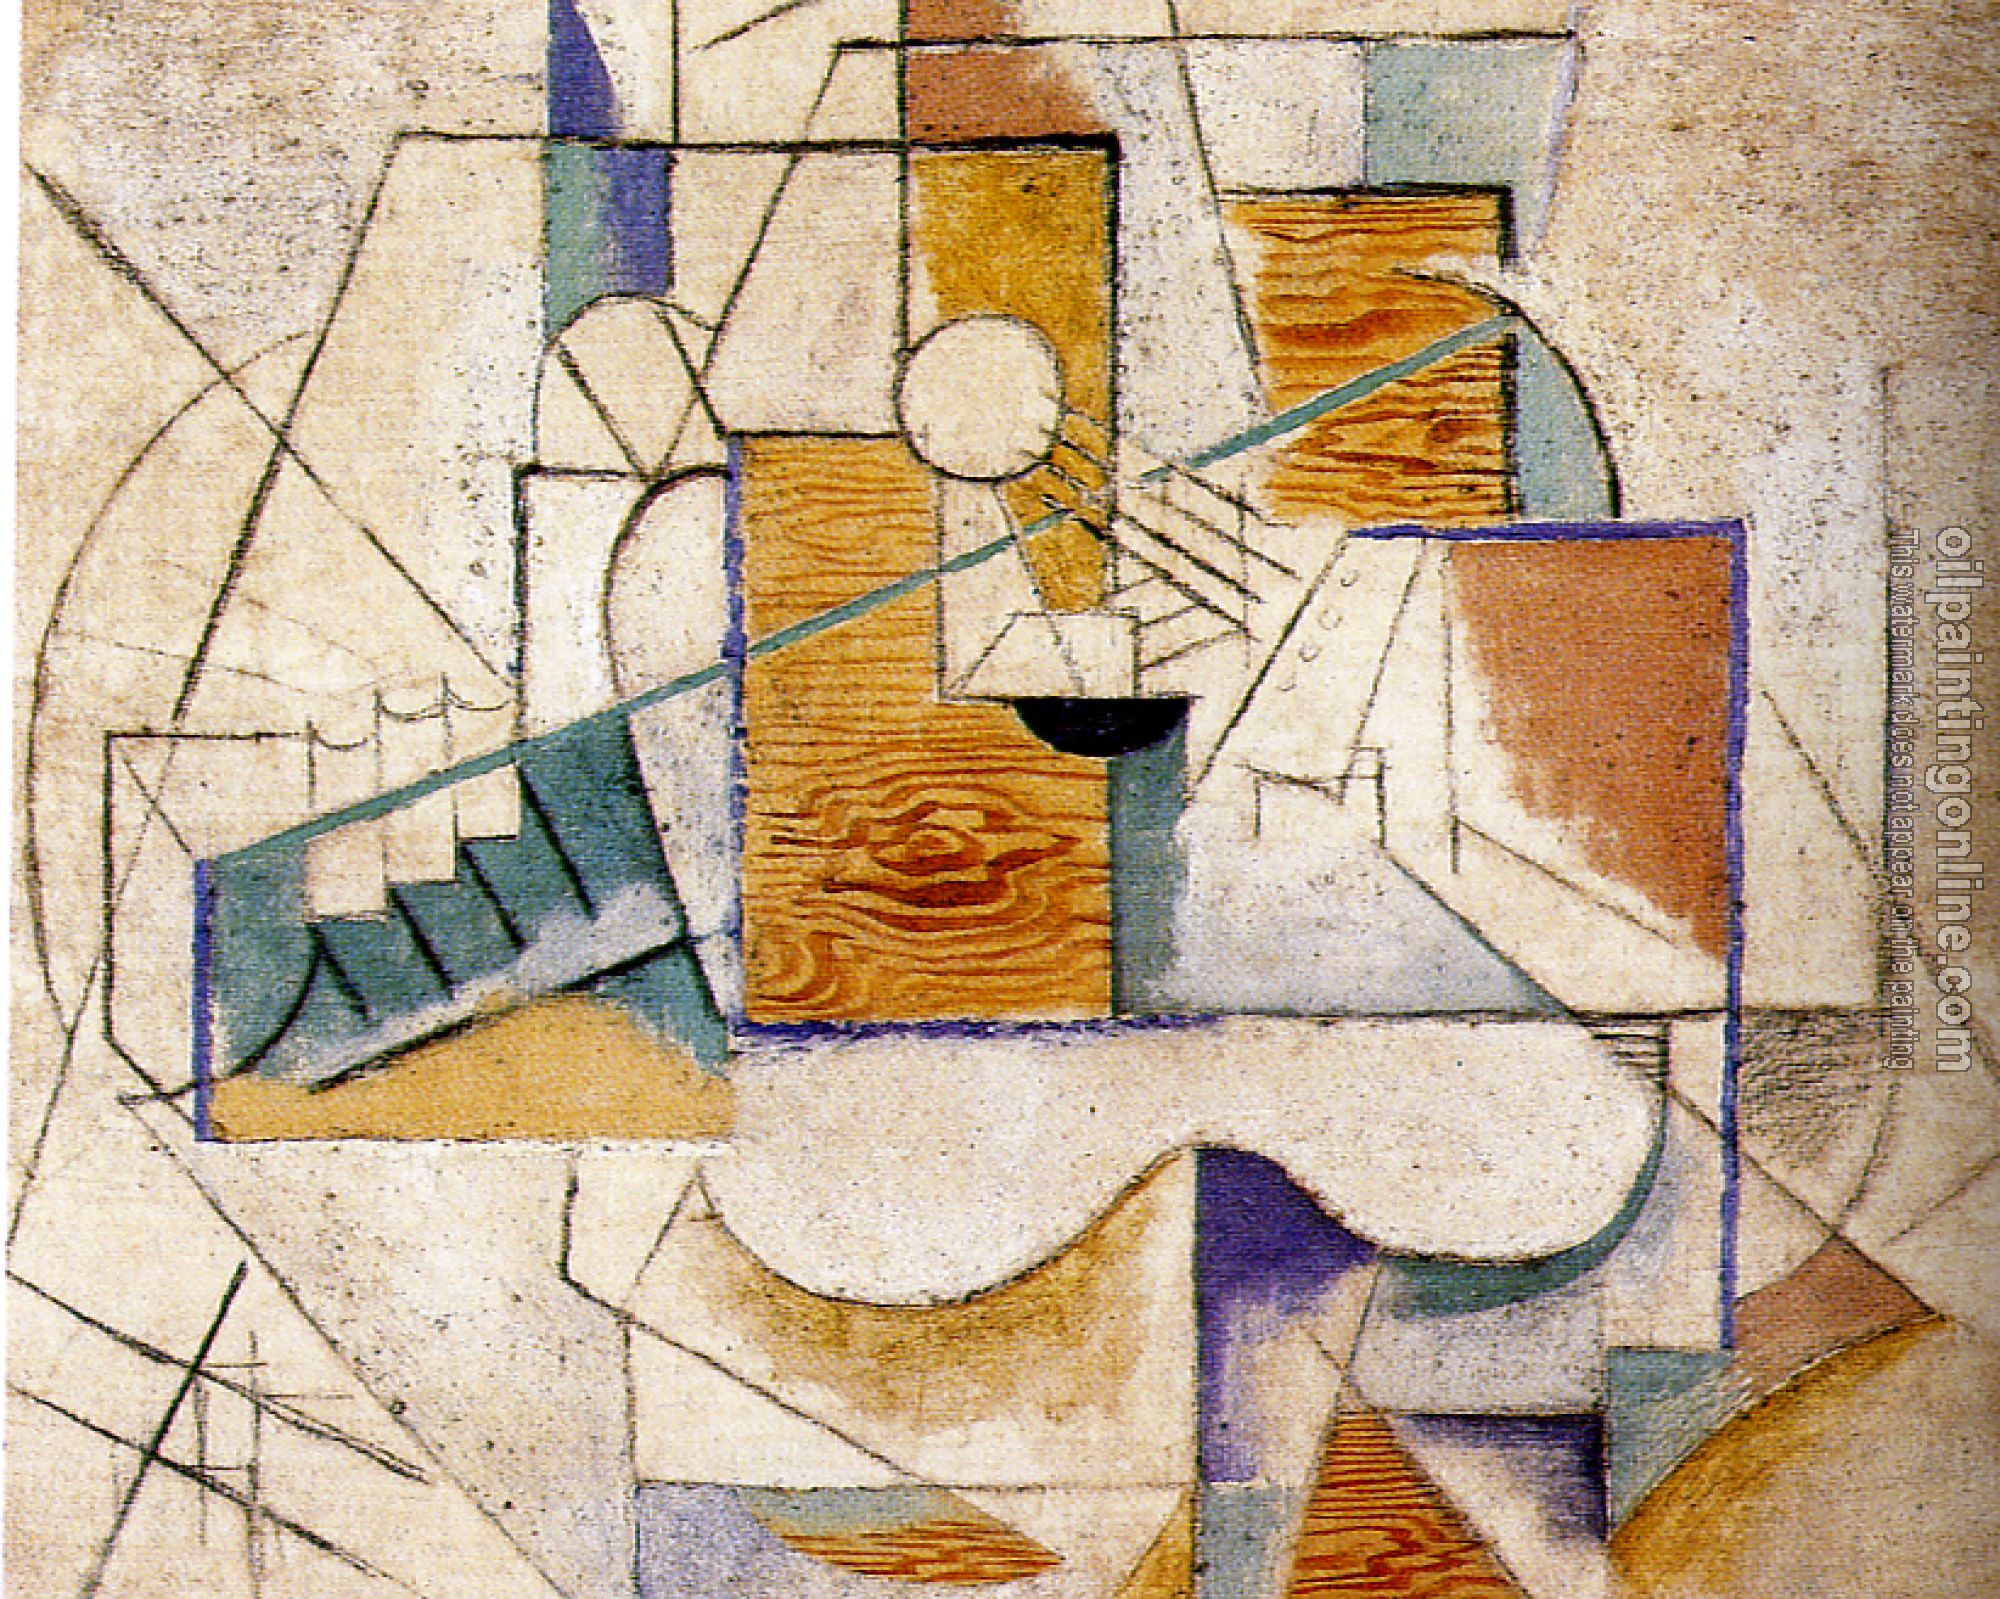 Picasso, Pablo - guitar on a table